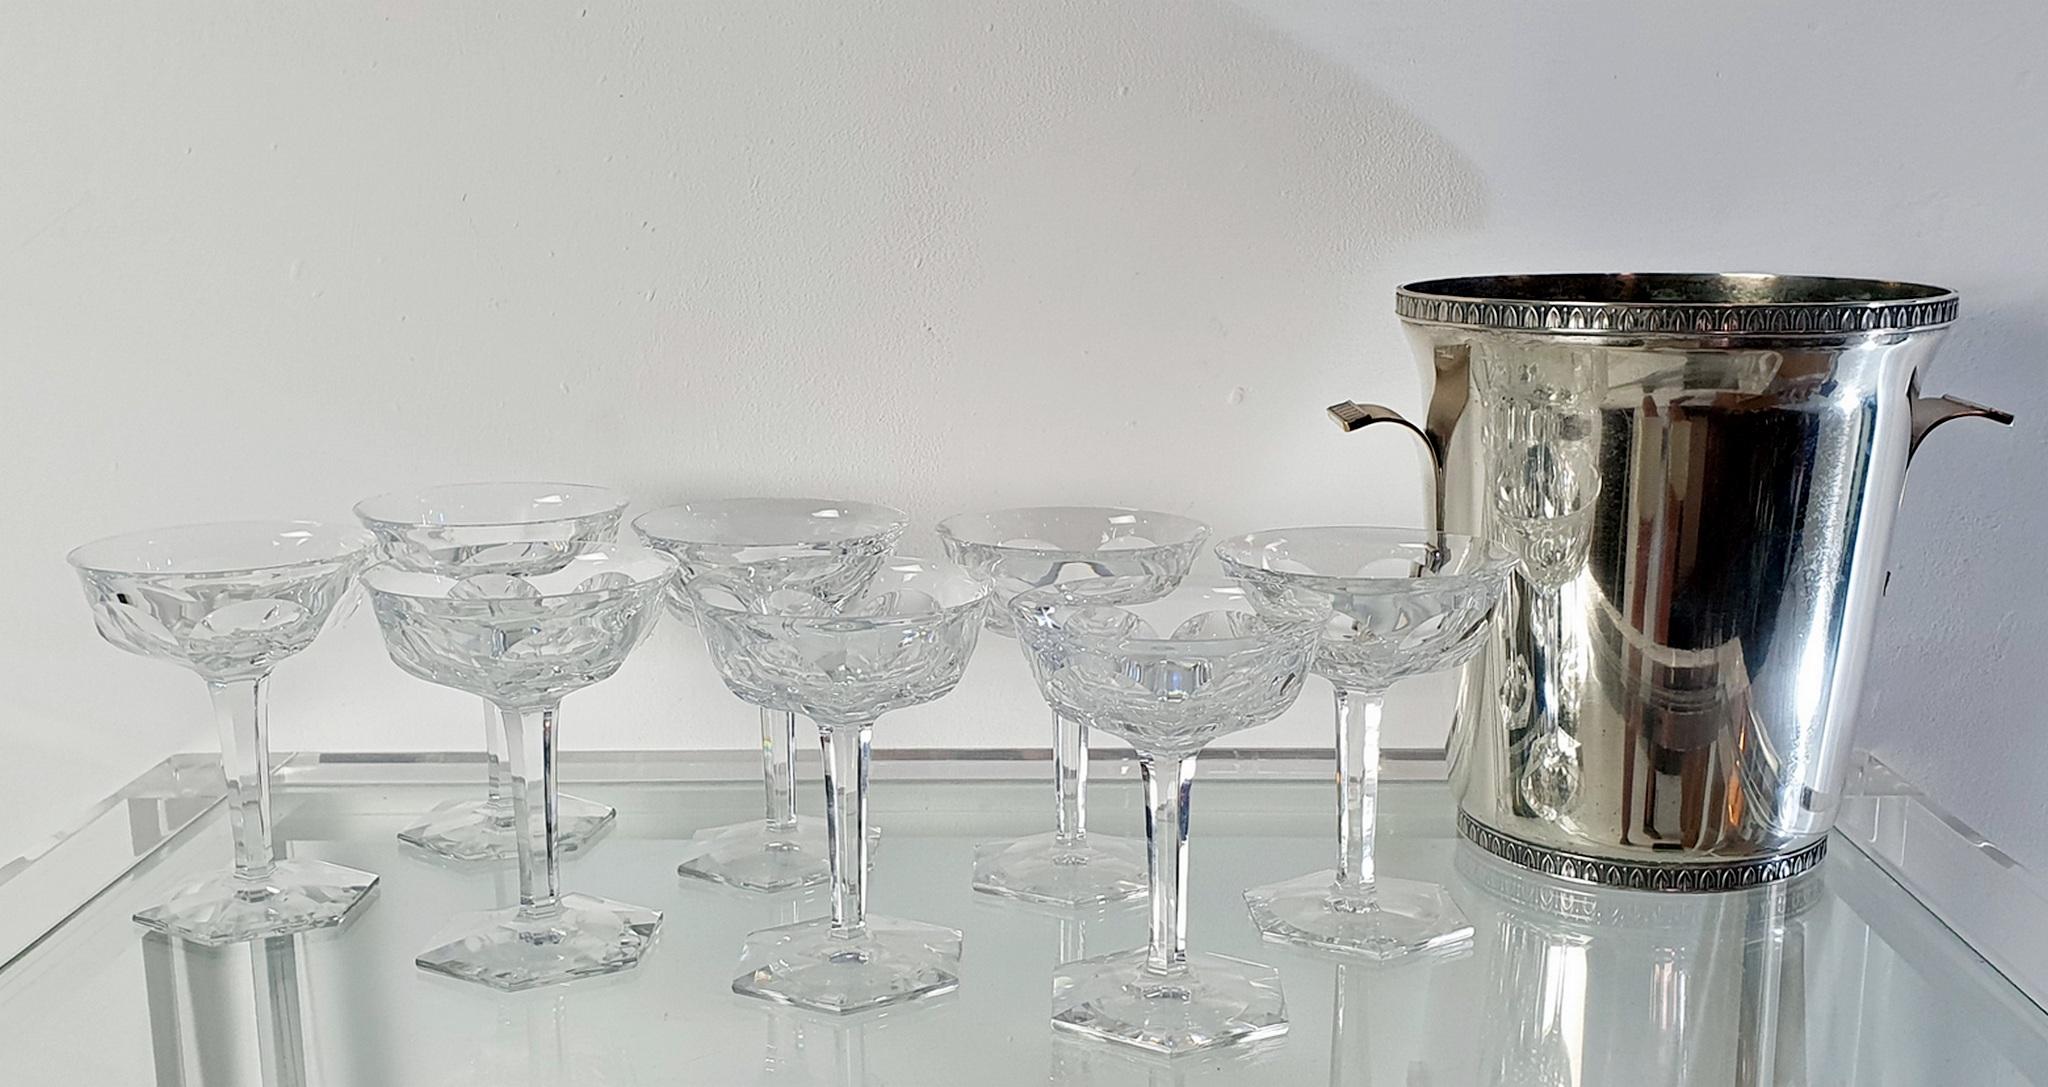 A wonderful vintage set of 8 Harcourt 1841 Champagne coupe glasses by Baccarat, France. Marked Baccarat, France in the bottom. No chipping or damage.

Pure, powerful and elegant at the same time, set on its hexagonal base, the most famous of the